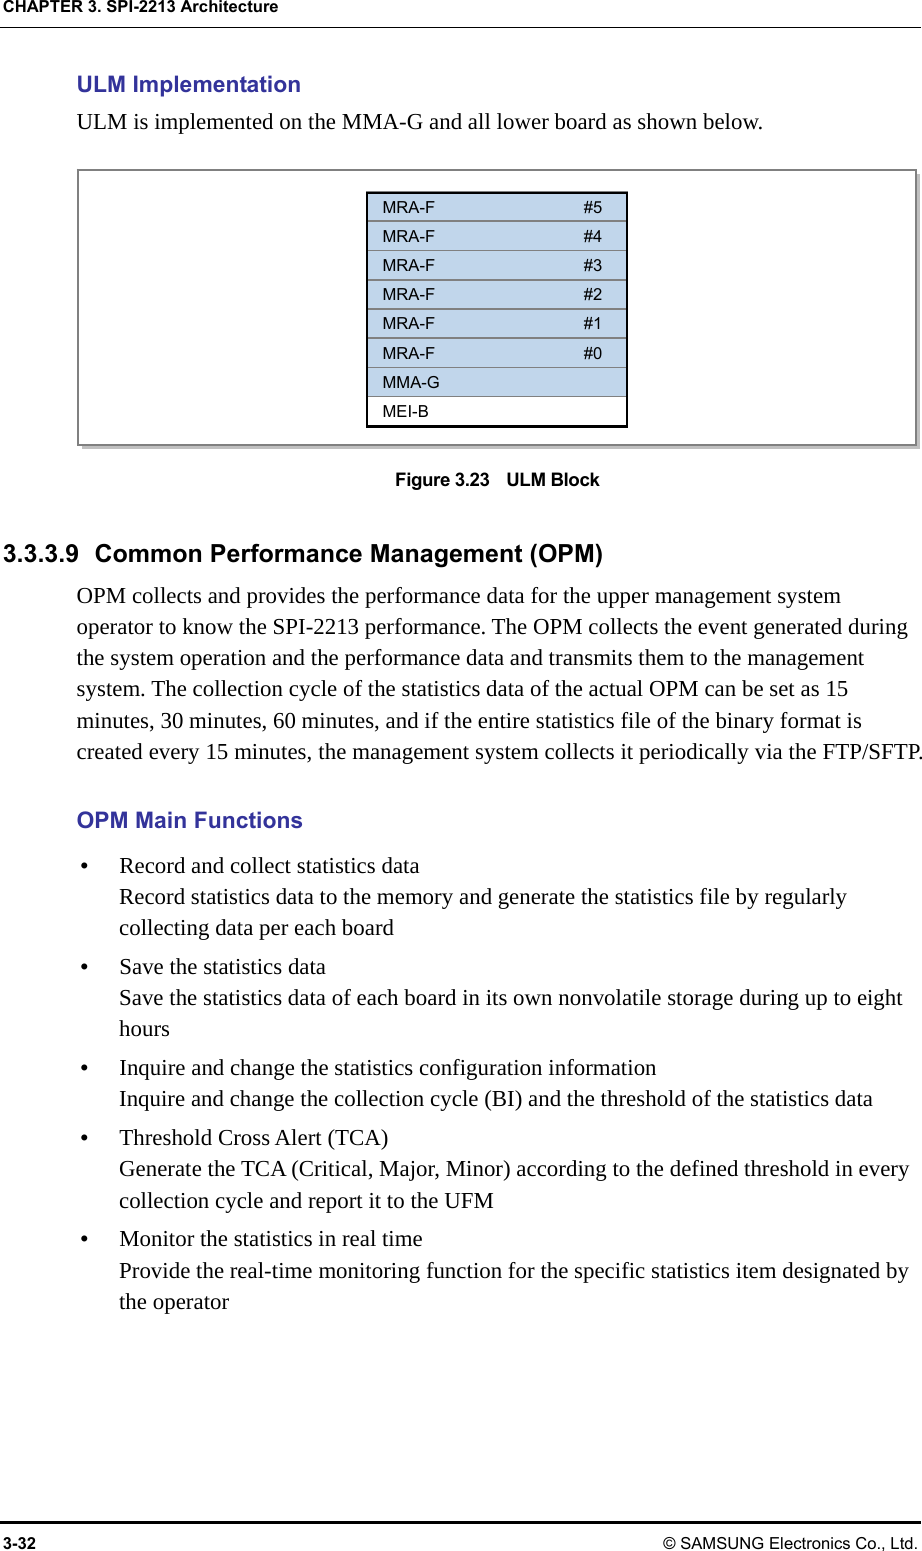 CHAPTER 3. SPI-2213 Architecture 3-32 © SAMSUNG Electronics Co., Ltd. ULM Implementation ULM is implemented on the MMA-G and all lower board as shown below.  Figure 3.23    ULM Block  3.3.3.9  Common Performance Management (OPM) OPM collects and provides the performance data for the upper management system operator to know the SPI-2213 performance. The OPM collects the event generated during the system operation and the performance data and transmits them to the management system. The collection cycle of the statistics data of the actual OPM can be set as 15 minutes, 30 minutes, 60 minutes, and if the entire statistics file of the binary format is created every 15 minutes, the management system collects it periodically via the FTP/SFTP.  OPM Main Functions y Record and collect statistics data Record statistics data to the memory and generate the statistics file by regularly collecting data per each board y Save the statistics data Save the statistics data of each board in its own nonvolatile storage during up to eight hours y Inquire and change the statistics configuration information Inquire and change the collection cycle (BI) and the threshold of the statistics data y Threshold Cross Alert (TCA) Generate the TCA (Critical, Major, Minor) according to the defined threshold in every collection cycle and report it to the UFM y Monitor the statistics in real time Provide the real-time monitoring function for the specific statistics item designated by the operator  MRA-F #5 MRA-F #4 MRA-F #3 MRA-F #2 MRA-F #1 MRA-F #0 MMA-G MEI-B